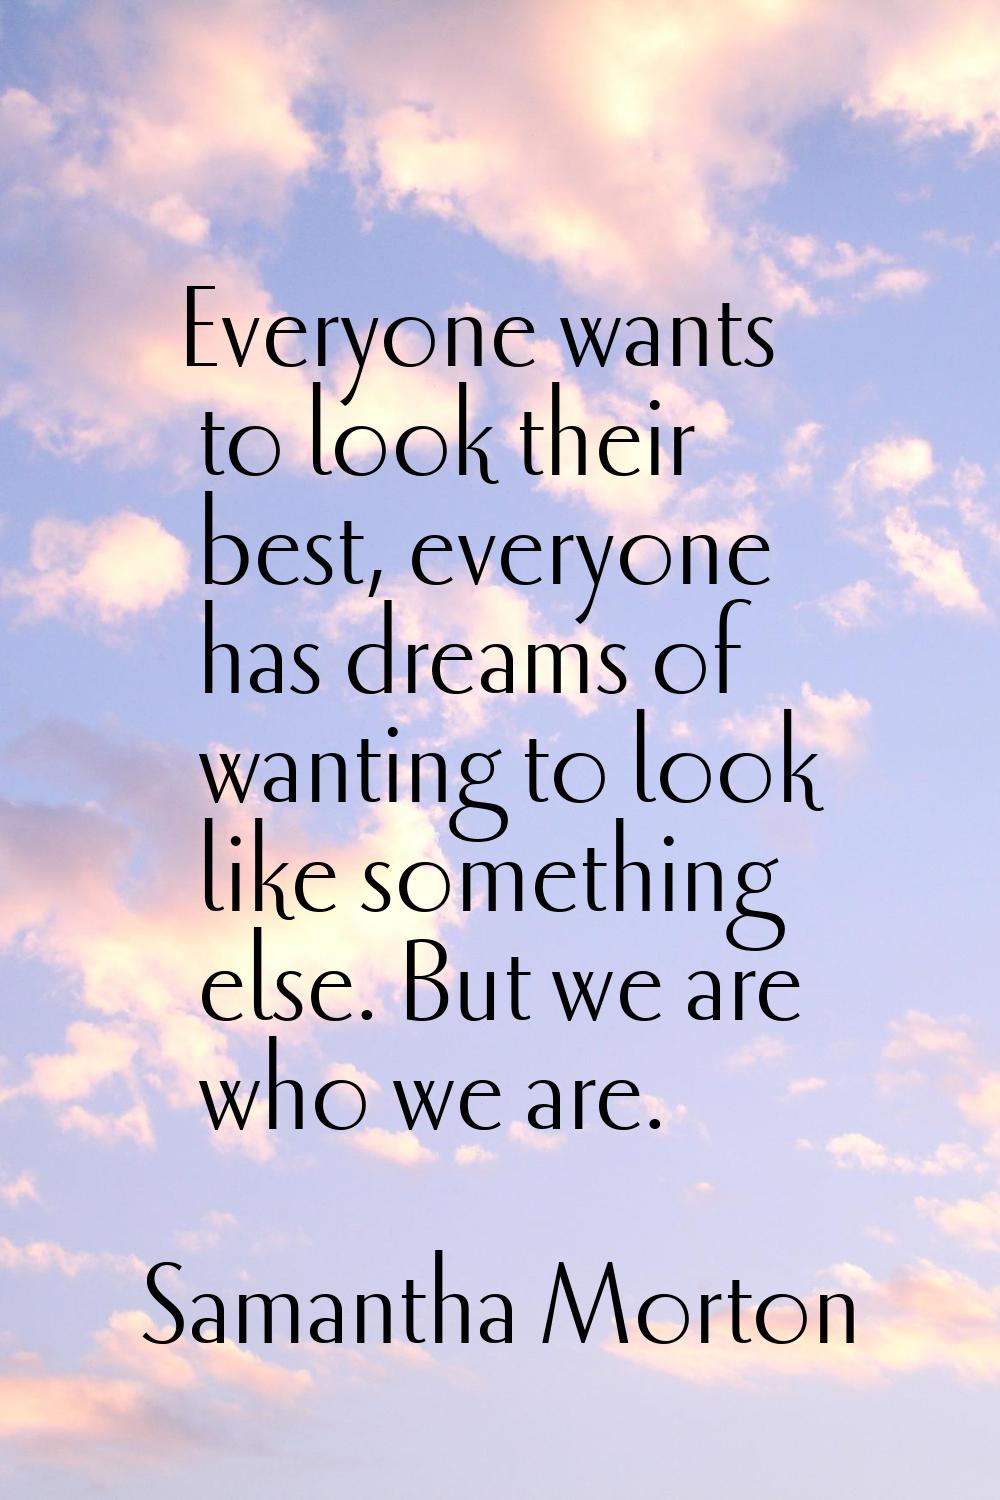 Everyone wants to look their best, everyone has dreams of wanting to look like something else. But 